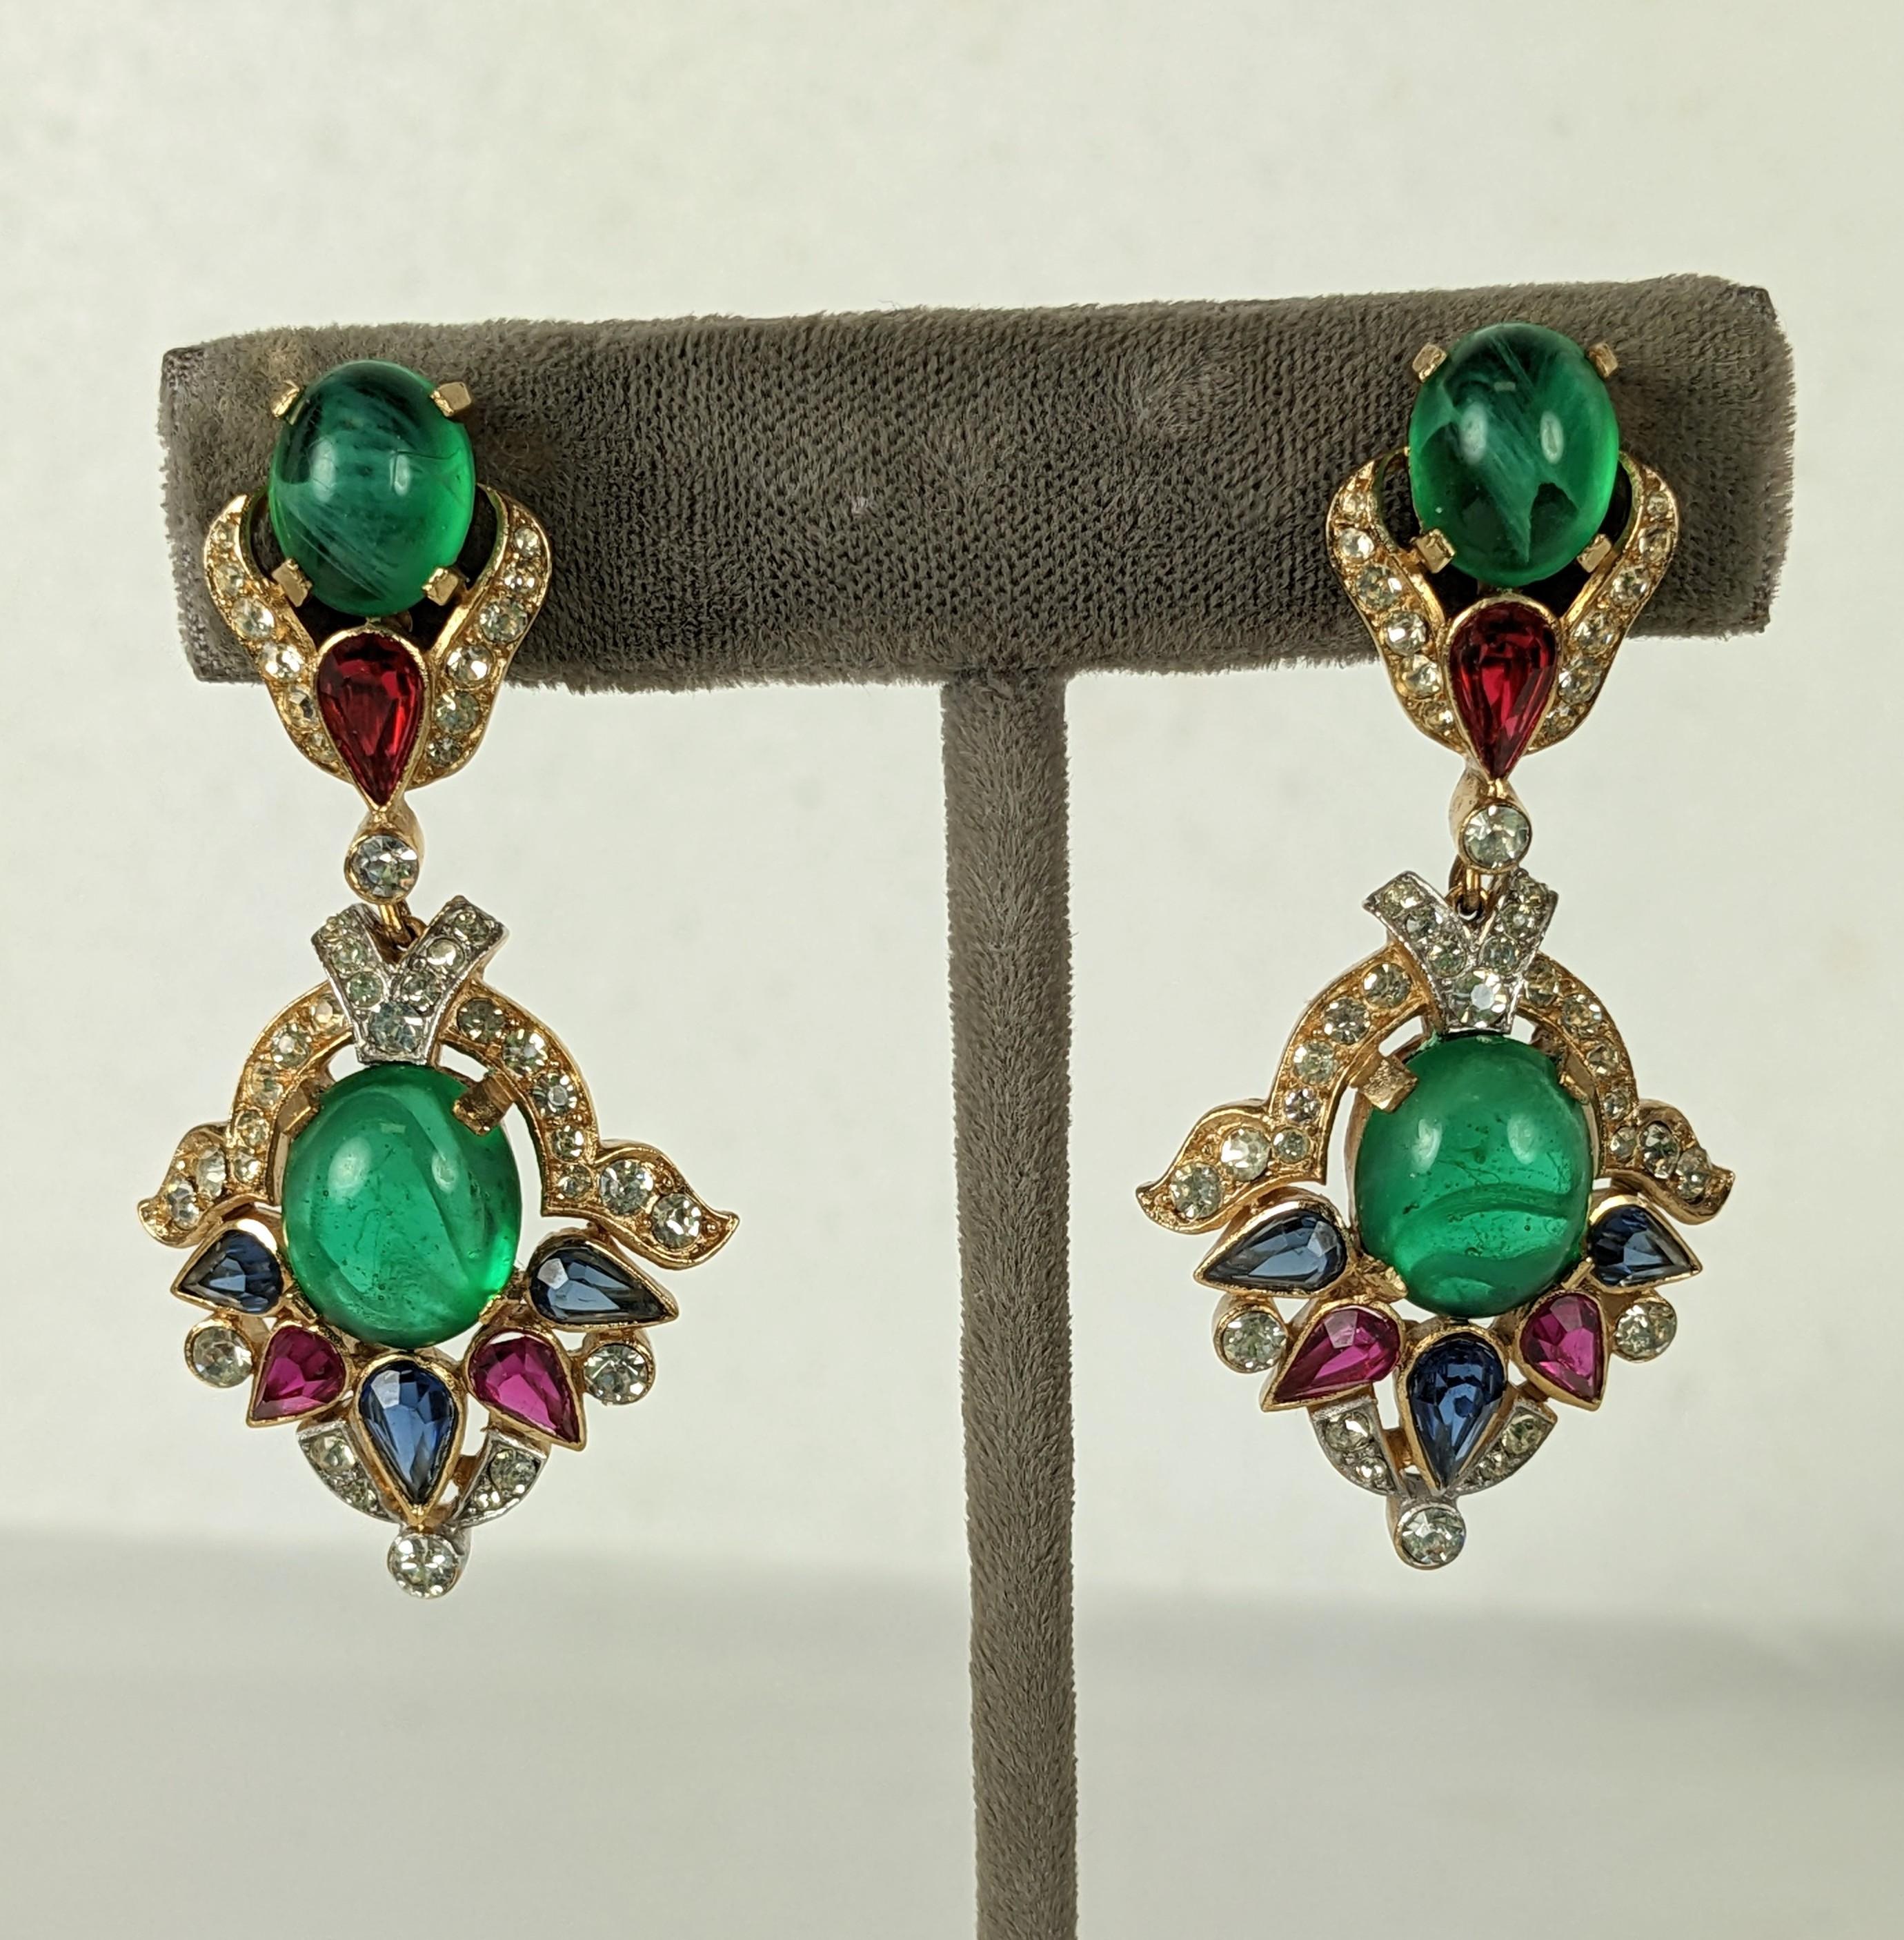 Rare Trifari Jewels of India Earrings from the Moghul series. Elaborate pave crystal stone work set in both gilt and rhodium metal with cabochon stones in jewel tones. 
1960's USA. 2